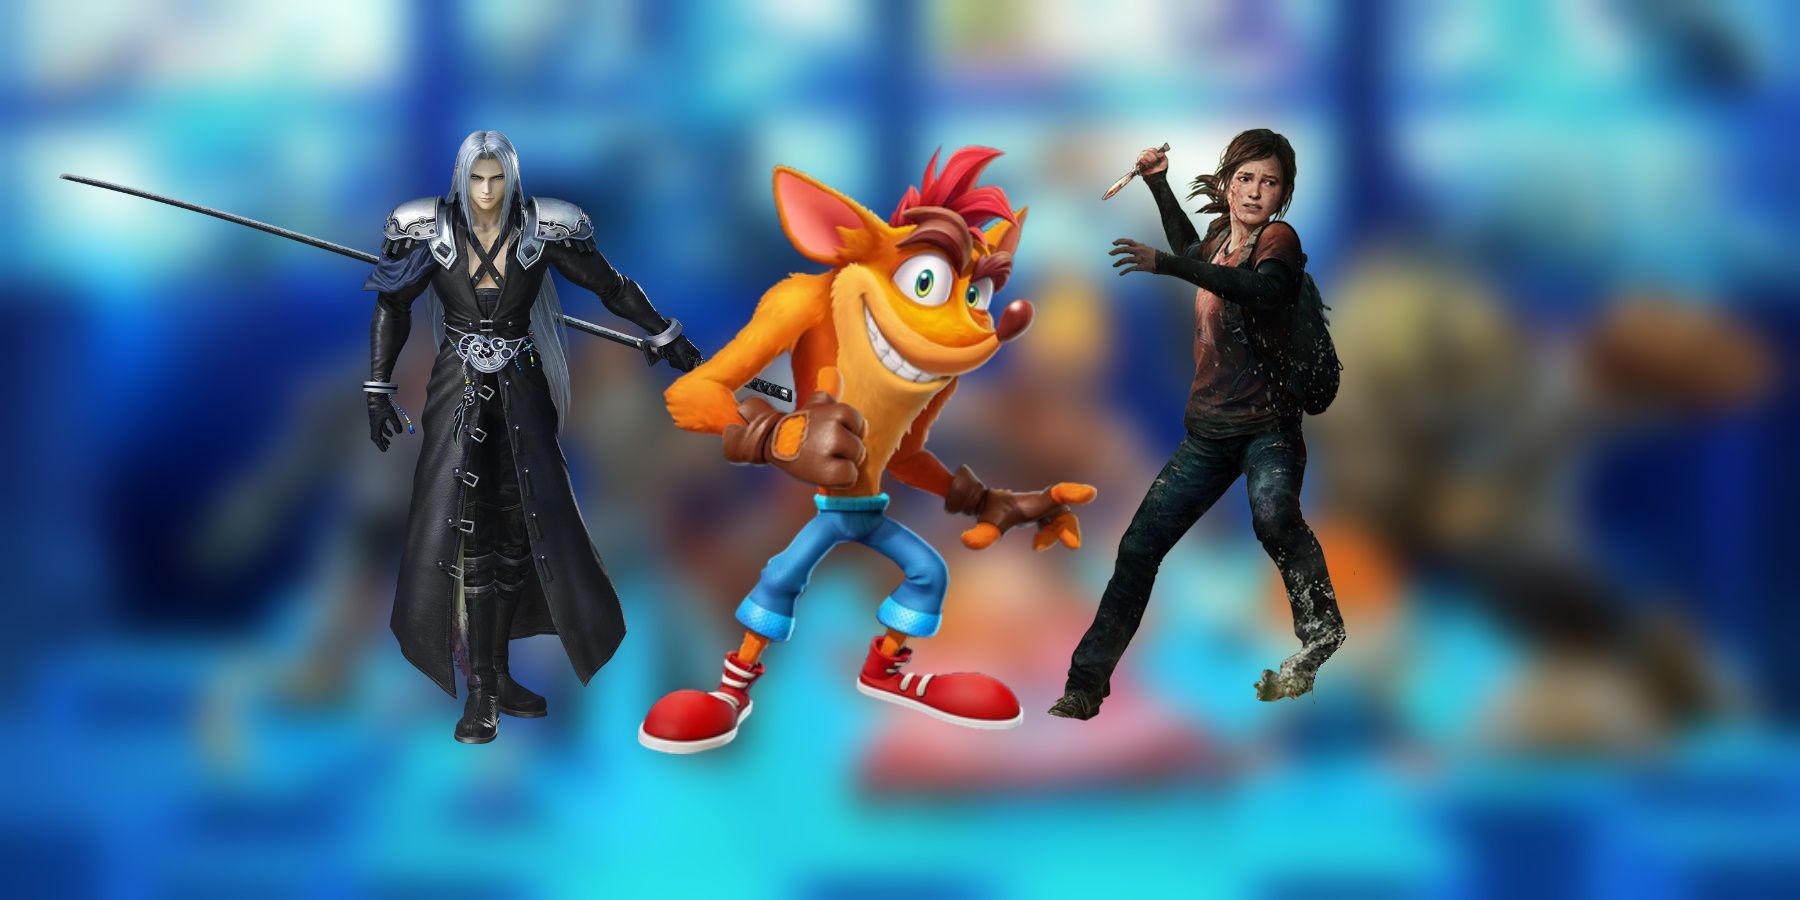 crash bandicoot sephiroth final fantasy 7 and ellie the last of us playstation all-stars battle royale